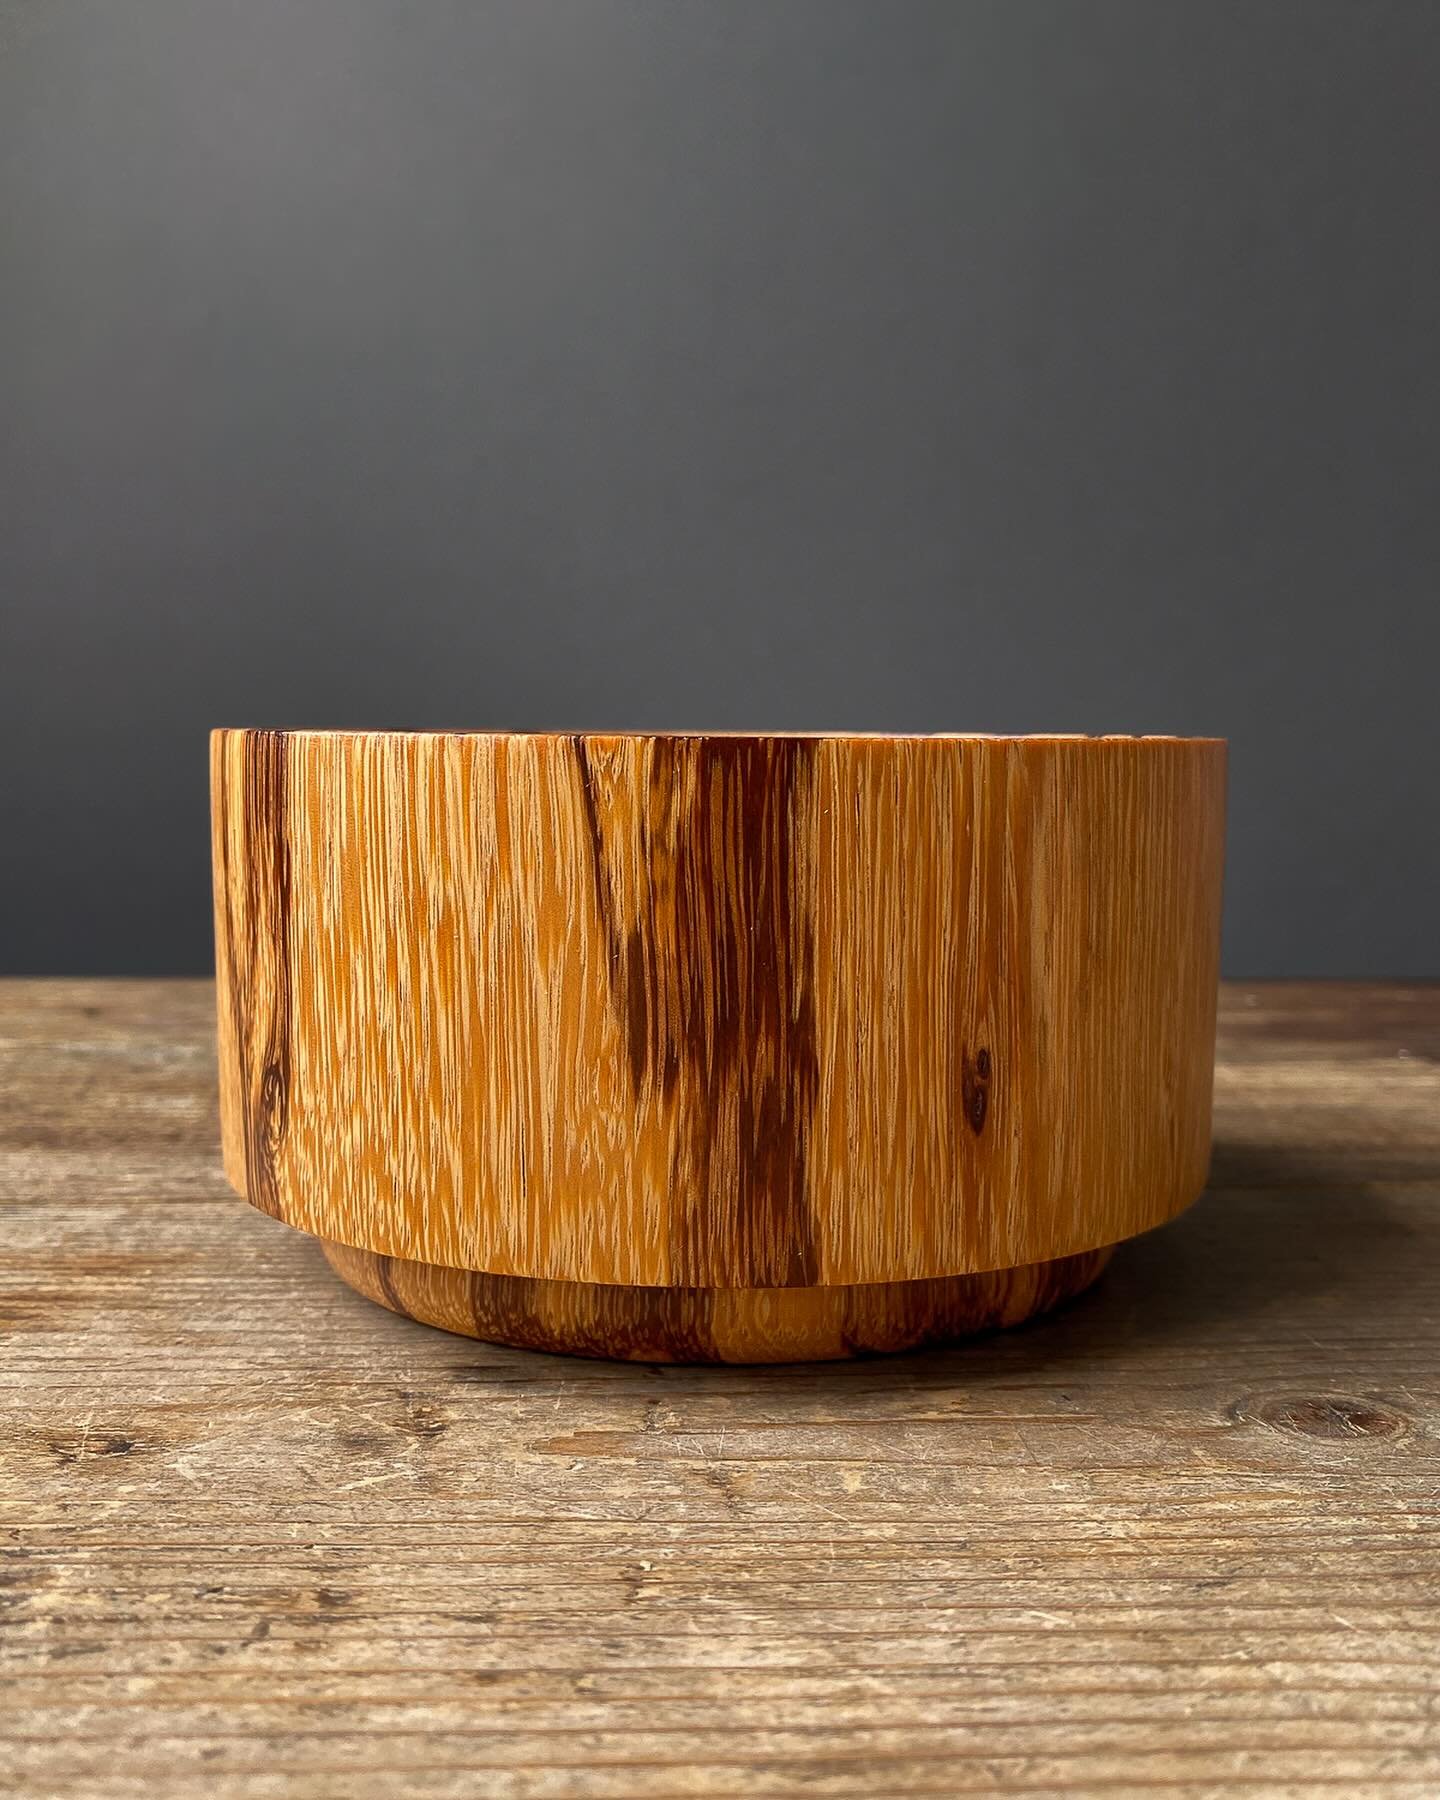 The OULI Marblewood Bowl ✨
.
.
My favourite understated piece from the last collection - hand crafted from bookmatched Marblewood, a beautifully patterned and tactile exotic hardwood native to Northeastern South America.

The bookmatched pattern is c